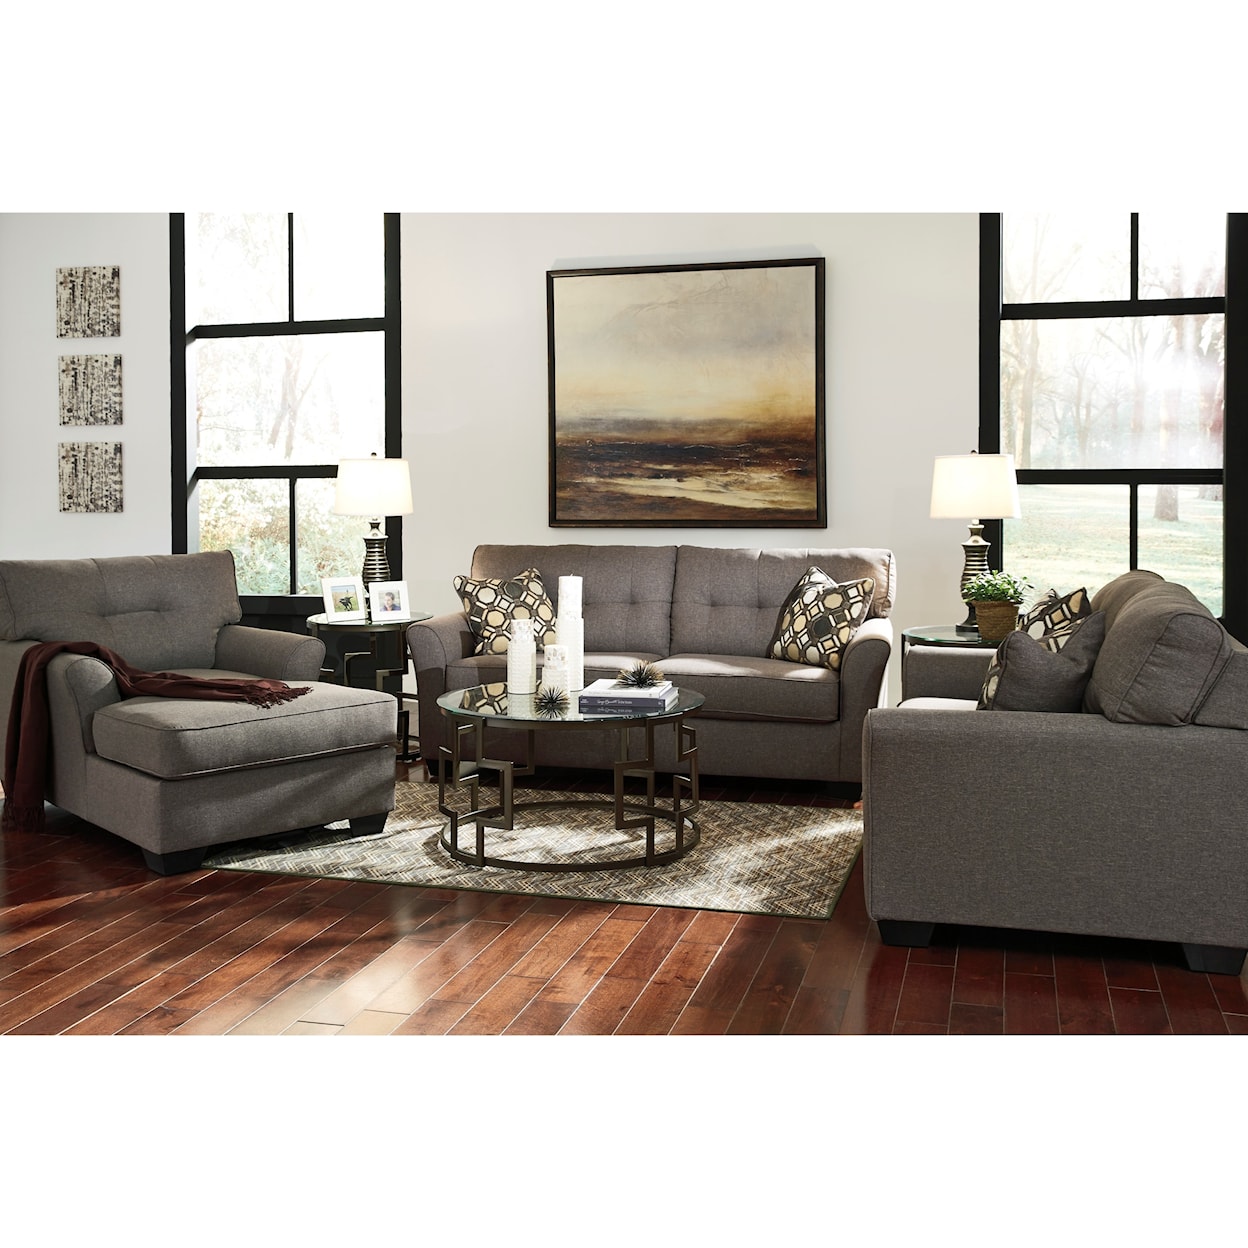 Signature Design by Ashley Furniture Tibbee Stationary Living Room Group